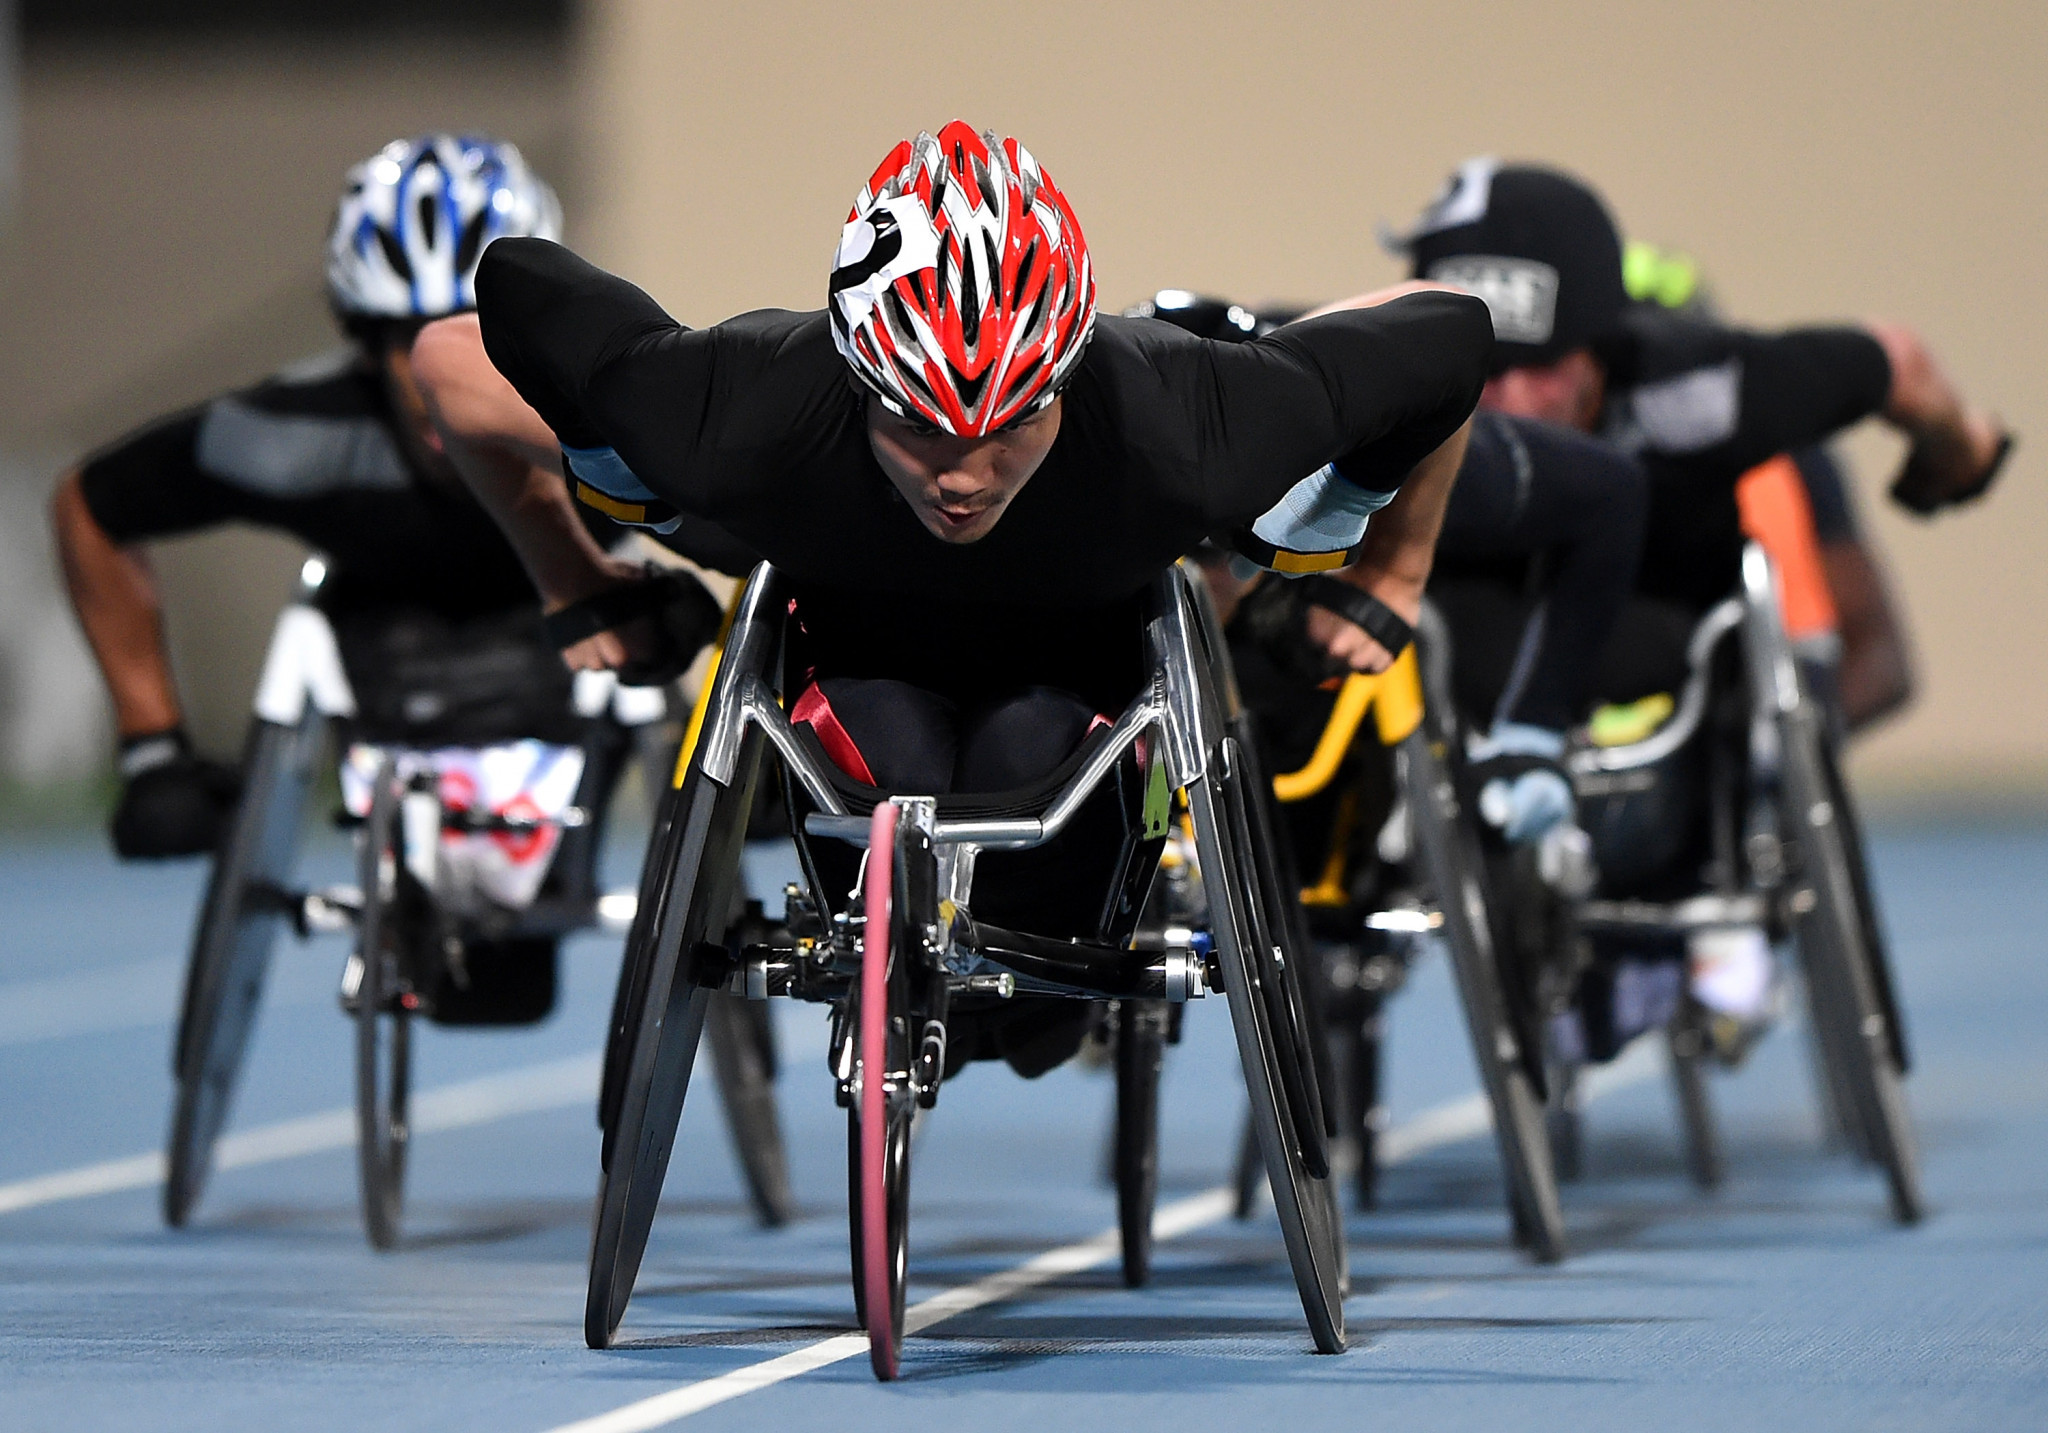 Masayuki Higuchi, of Japan, competes in 5000metre Wheelchair Men's final during the World Para Athletics Grand Prix in March  2017 in Dubai ©Getty Images